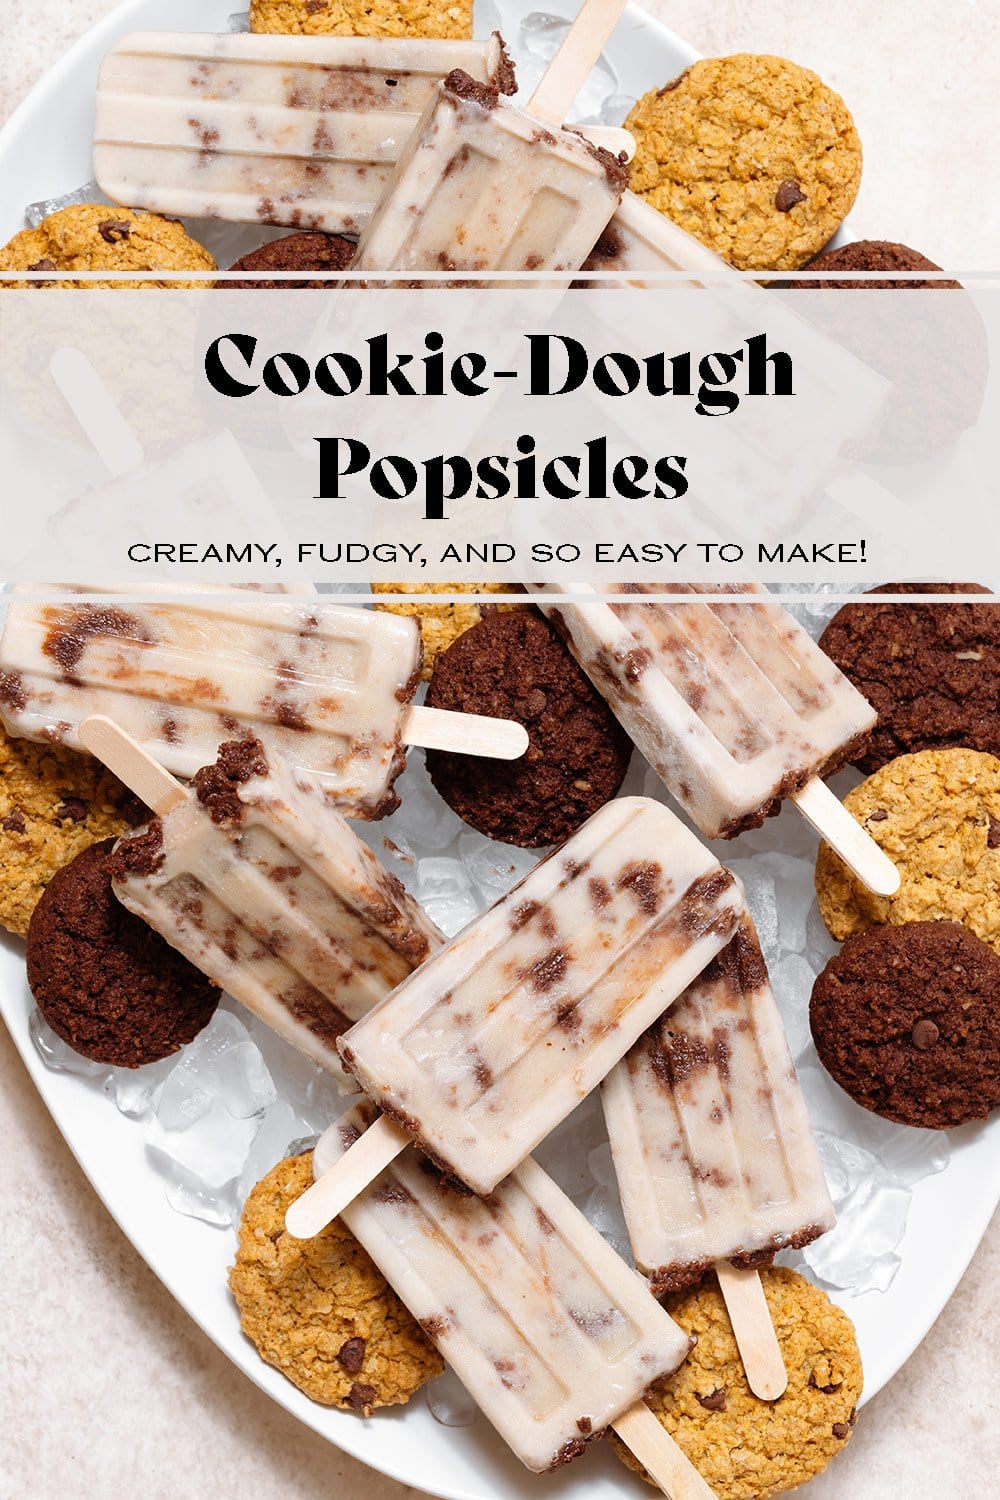 Chocolate Cookie Dough Popsicles